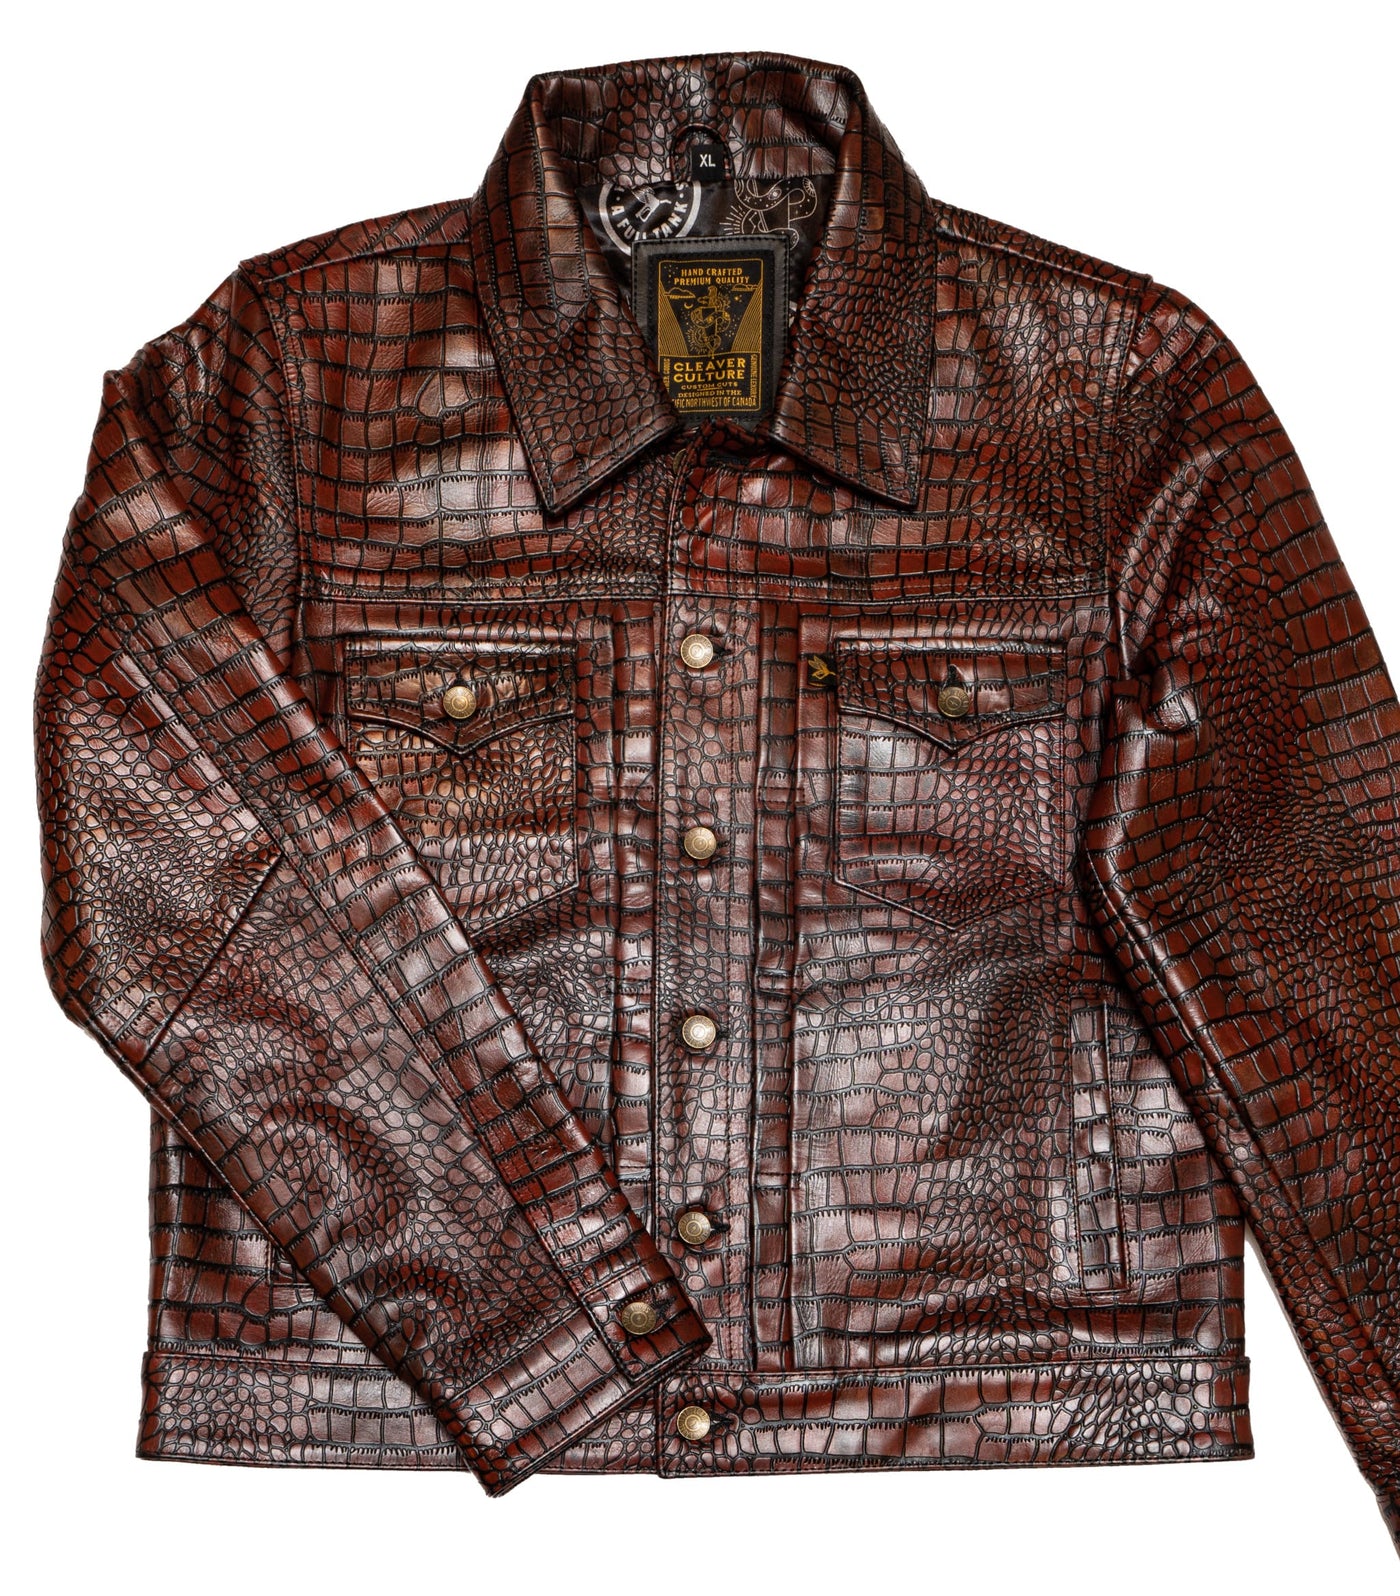 Lords x Cleaver Culture Steazy Ryder Jacket - Ox Blood Crocodile Leather